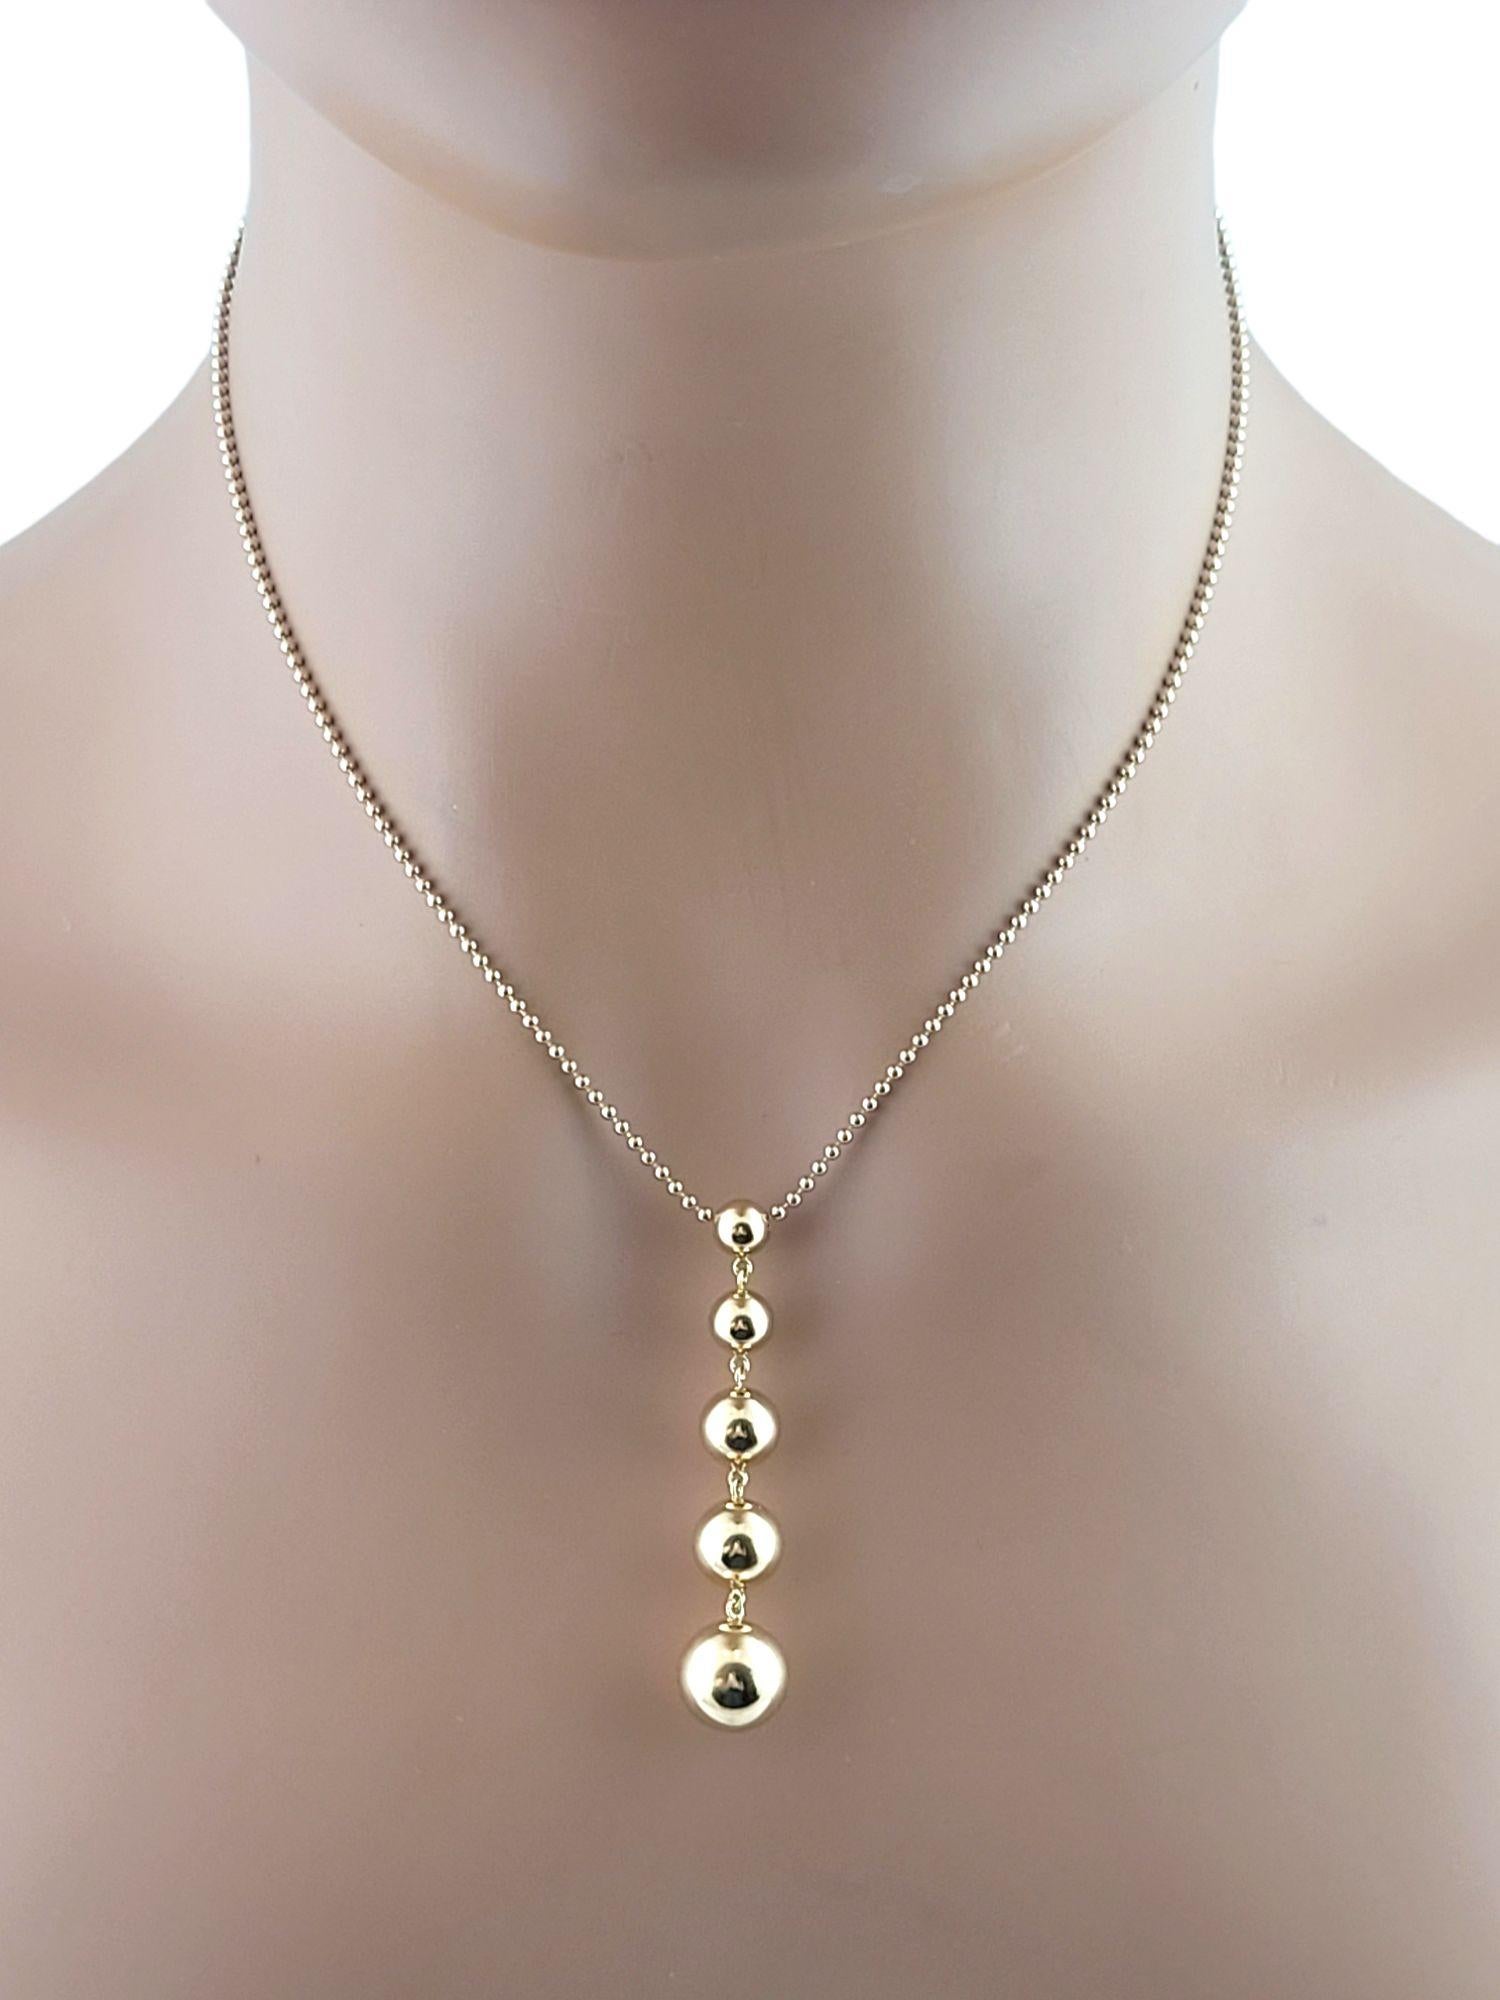 Tiffany & Co 18K Yellow Gold Graduated Bead Drop Pendant Necklace #14791 For Sale 2